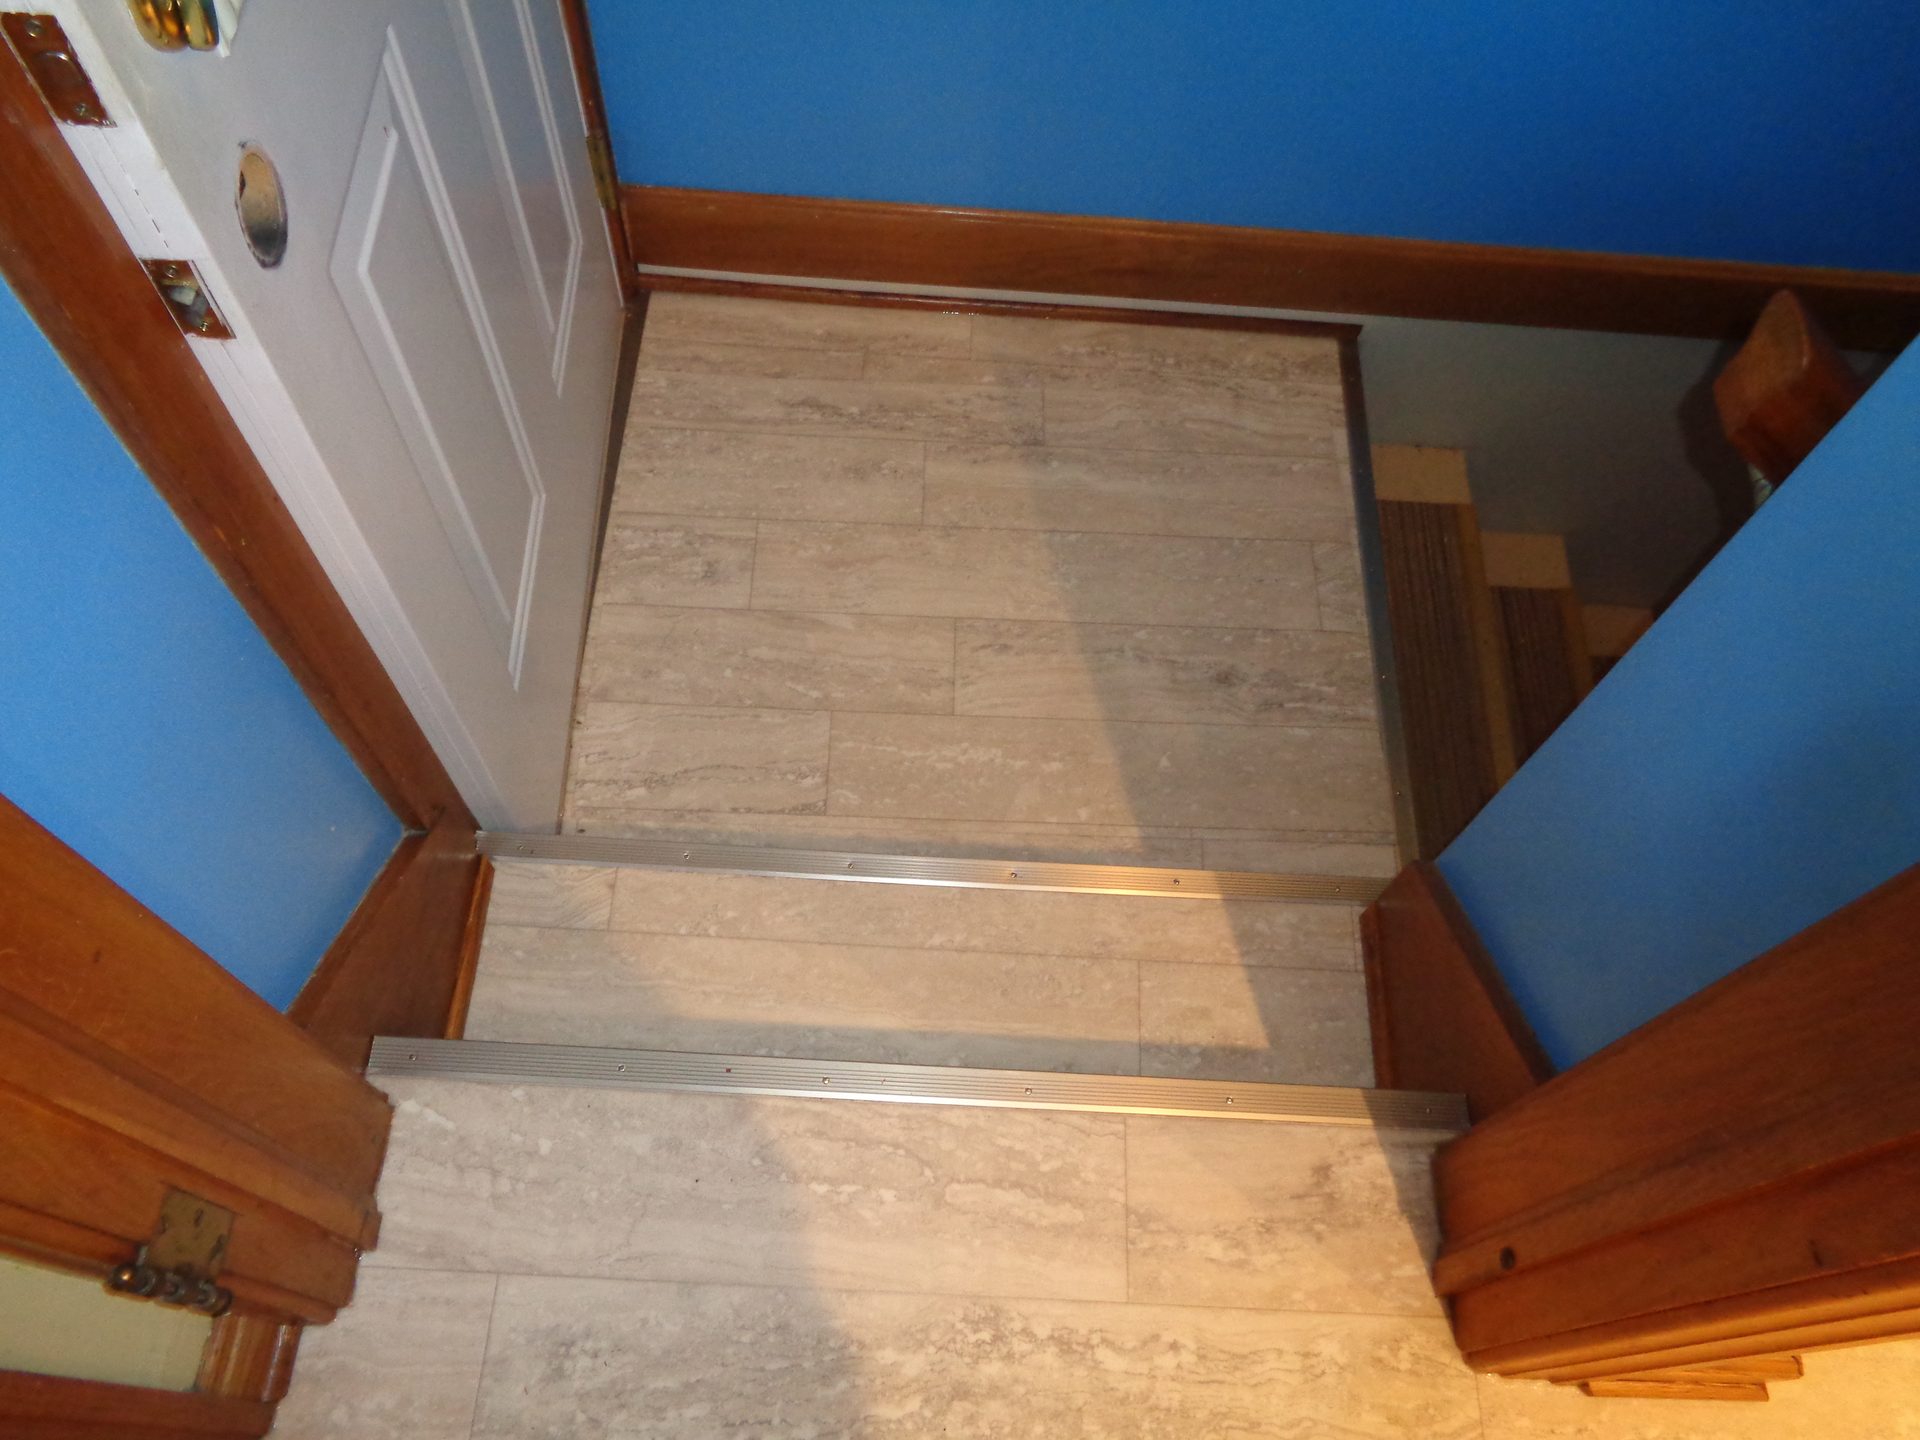 Wood stain, Composite material, Brown, Fixture, Rectangle, Stairs, Flooring, Floor, Wall